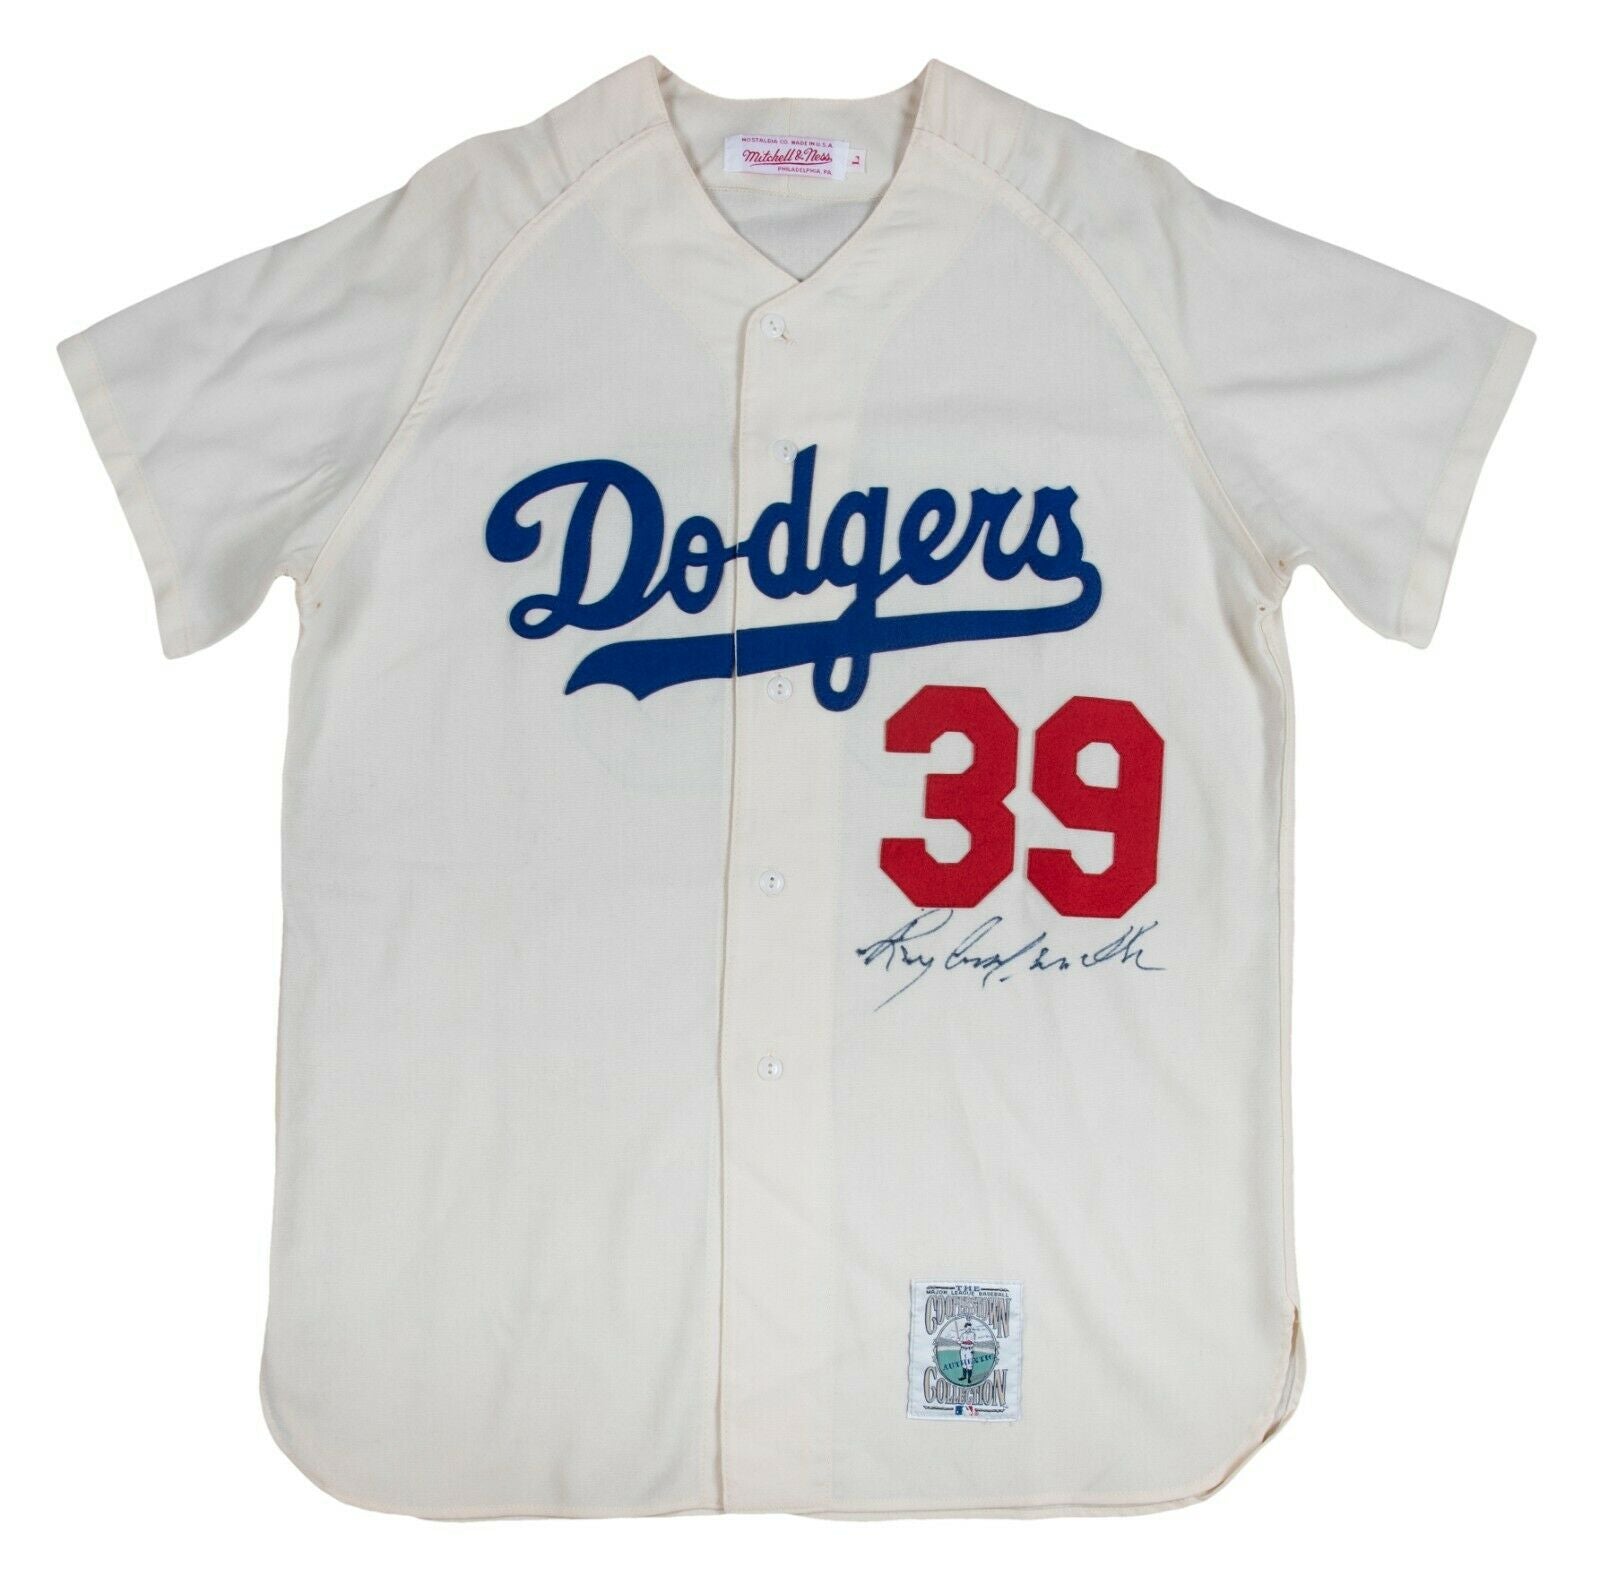 Mitchell & Ness Jackie Robinson Brooklyn Dodgers Gray Authentic Jersey